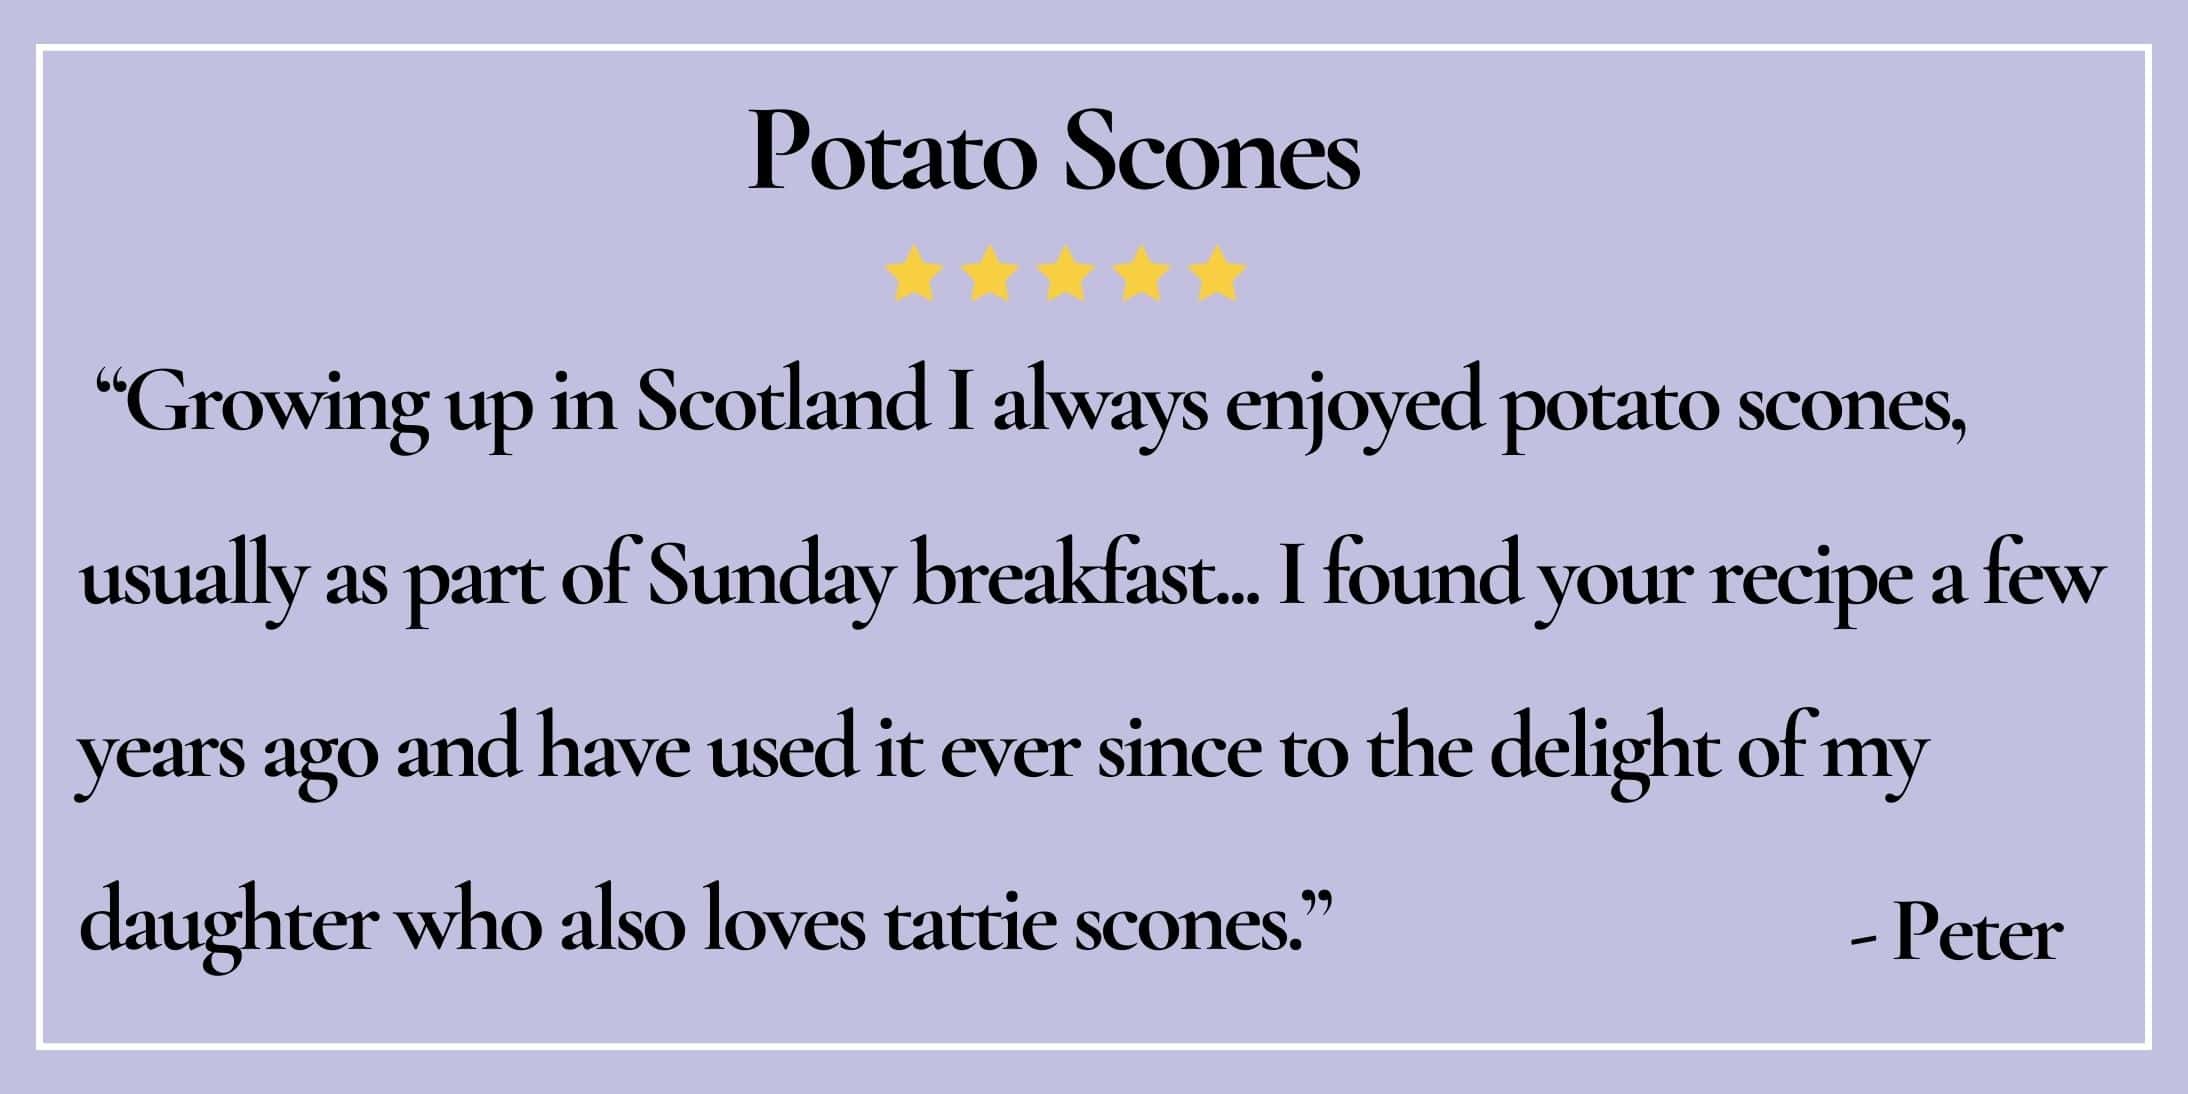 Text box with paraphrase: I grew up in Scotland... I found your recipe a few years ago and have used it ever since. -Peter